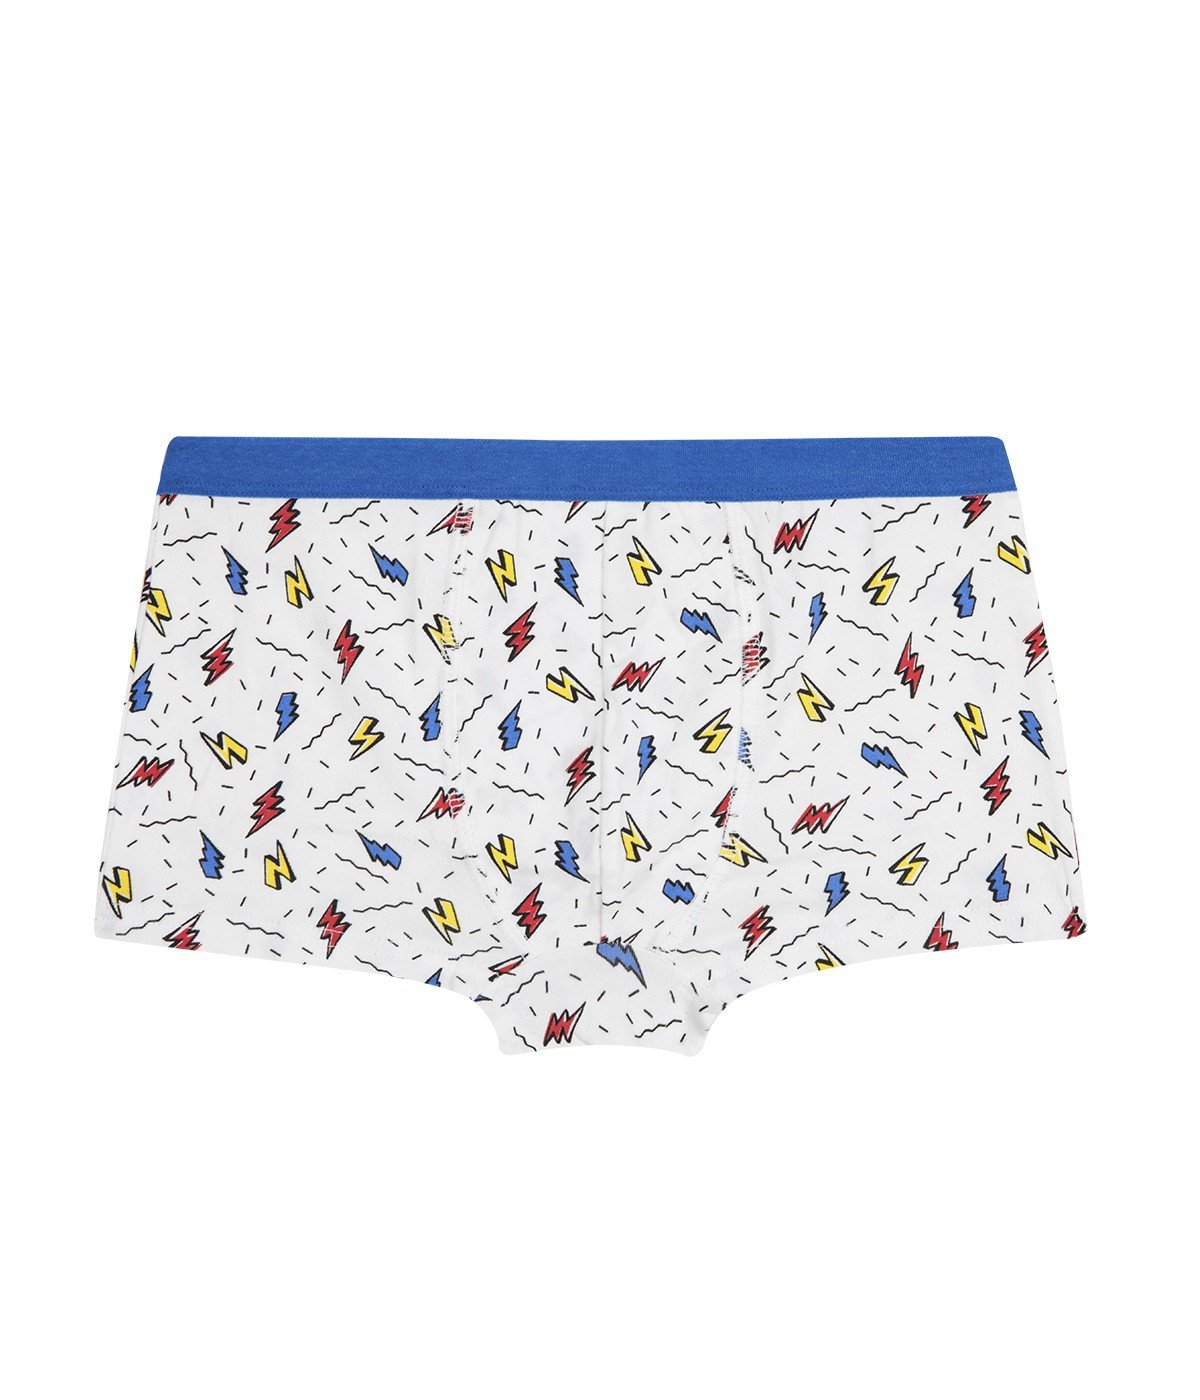 Boys The Band 2In1 Boxer